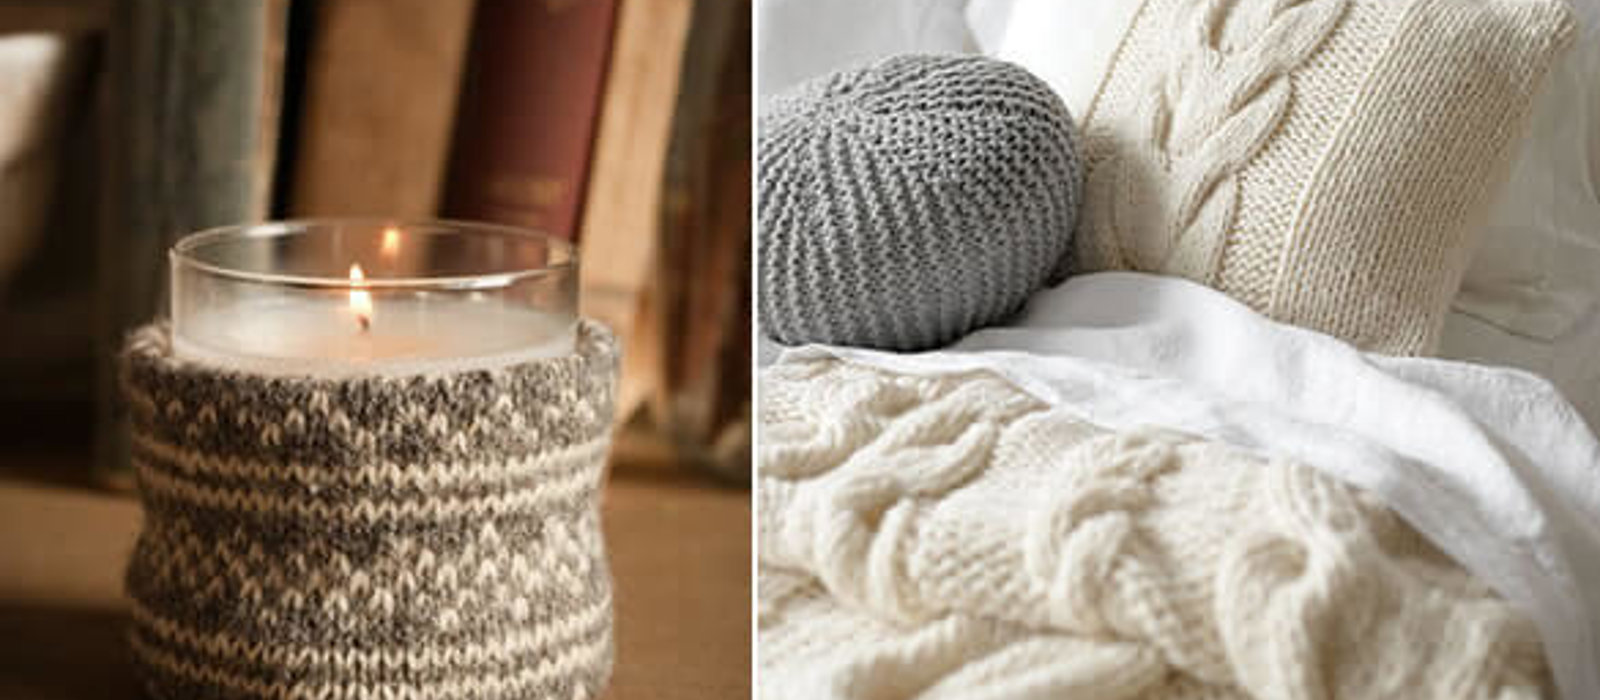 Close up of a candle and cosy bed with knitted throws and blankets